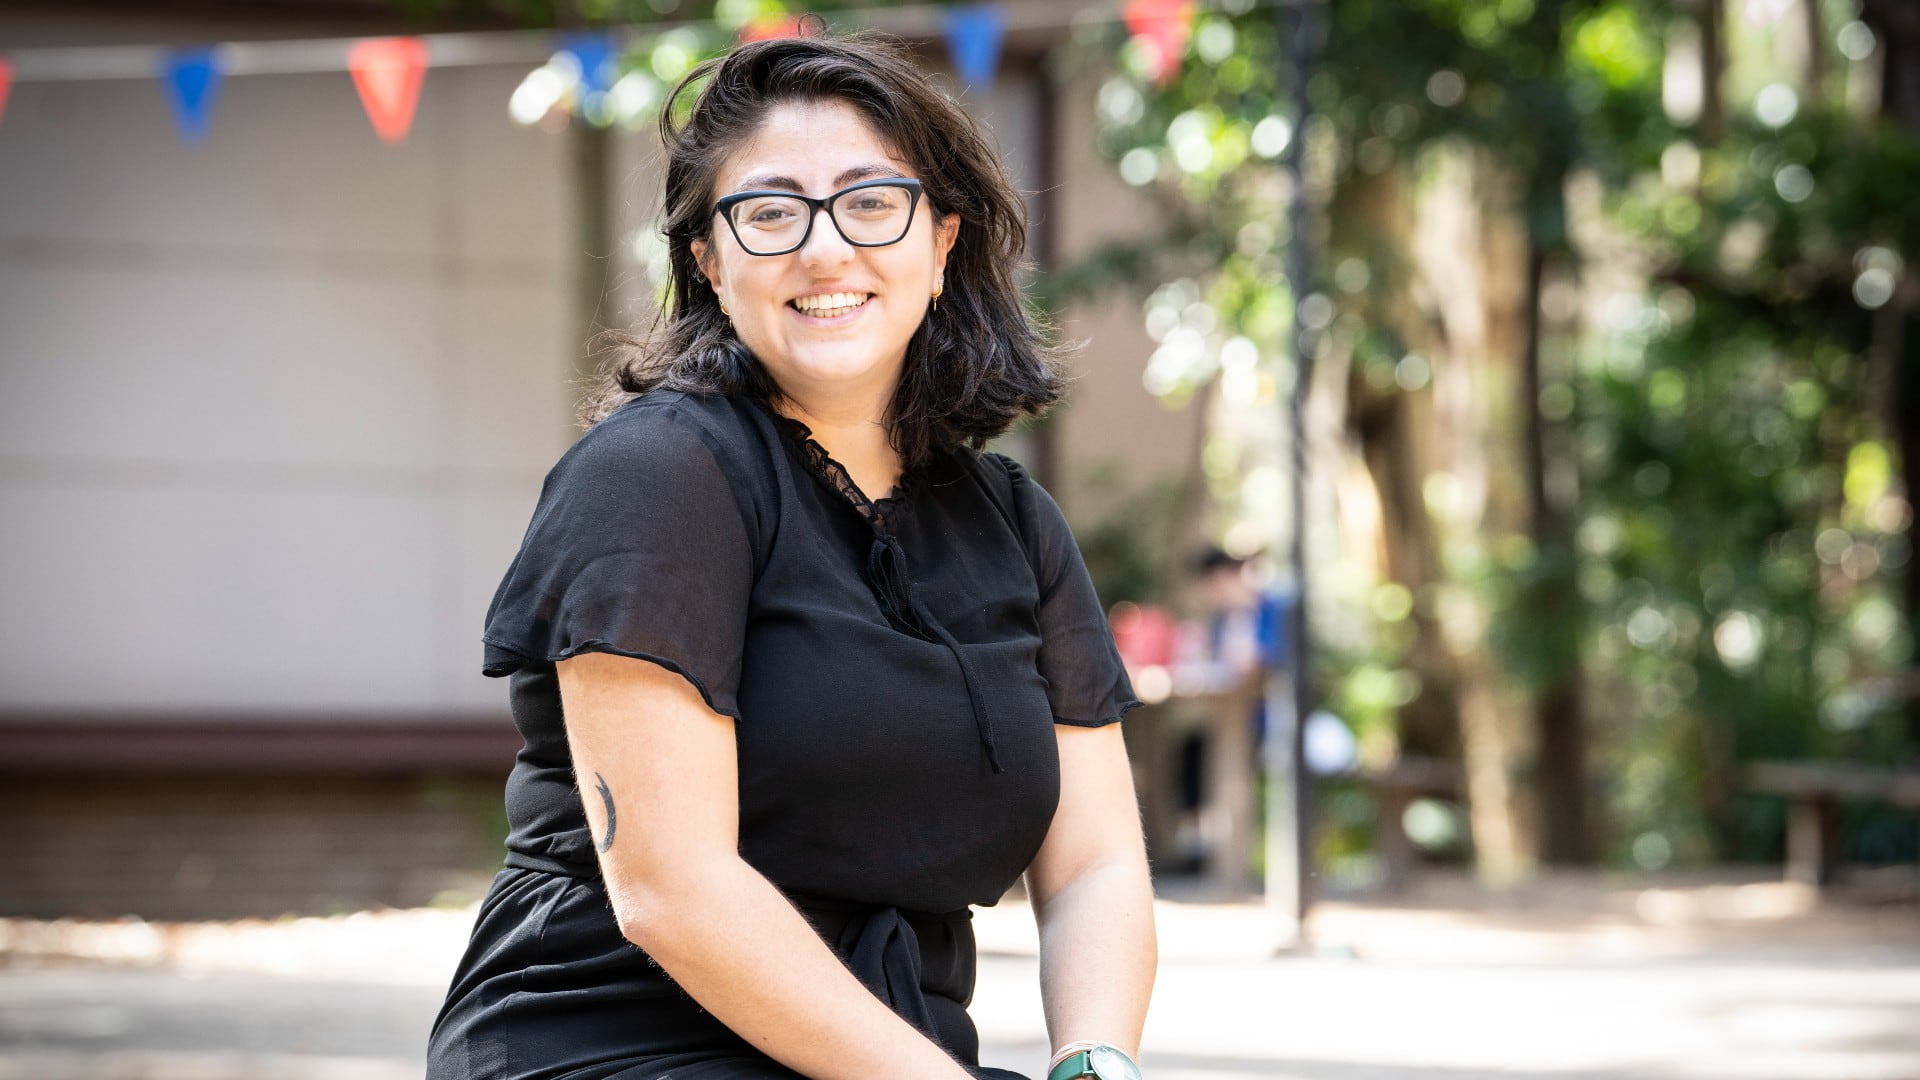 Eda Gunaydin wears a black dress and black glasses, sits on a bench and smiles at the camera. The background is slightly blurry. Photo: Paul Jones